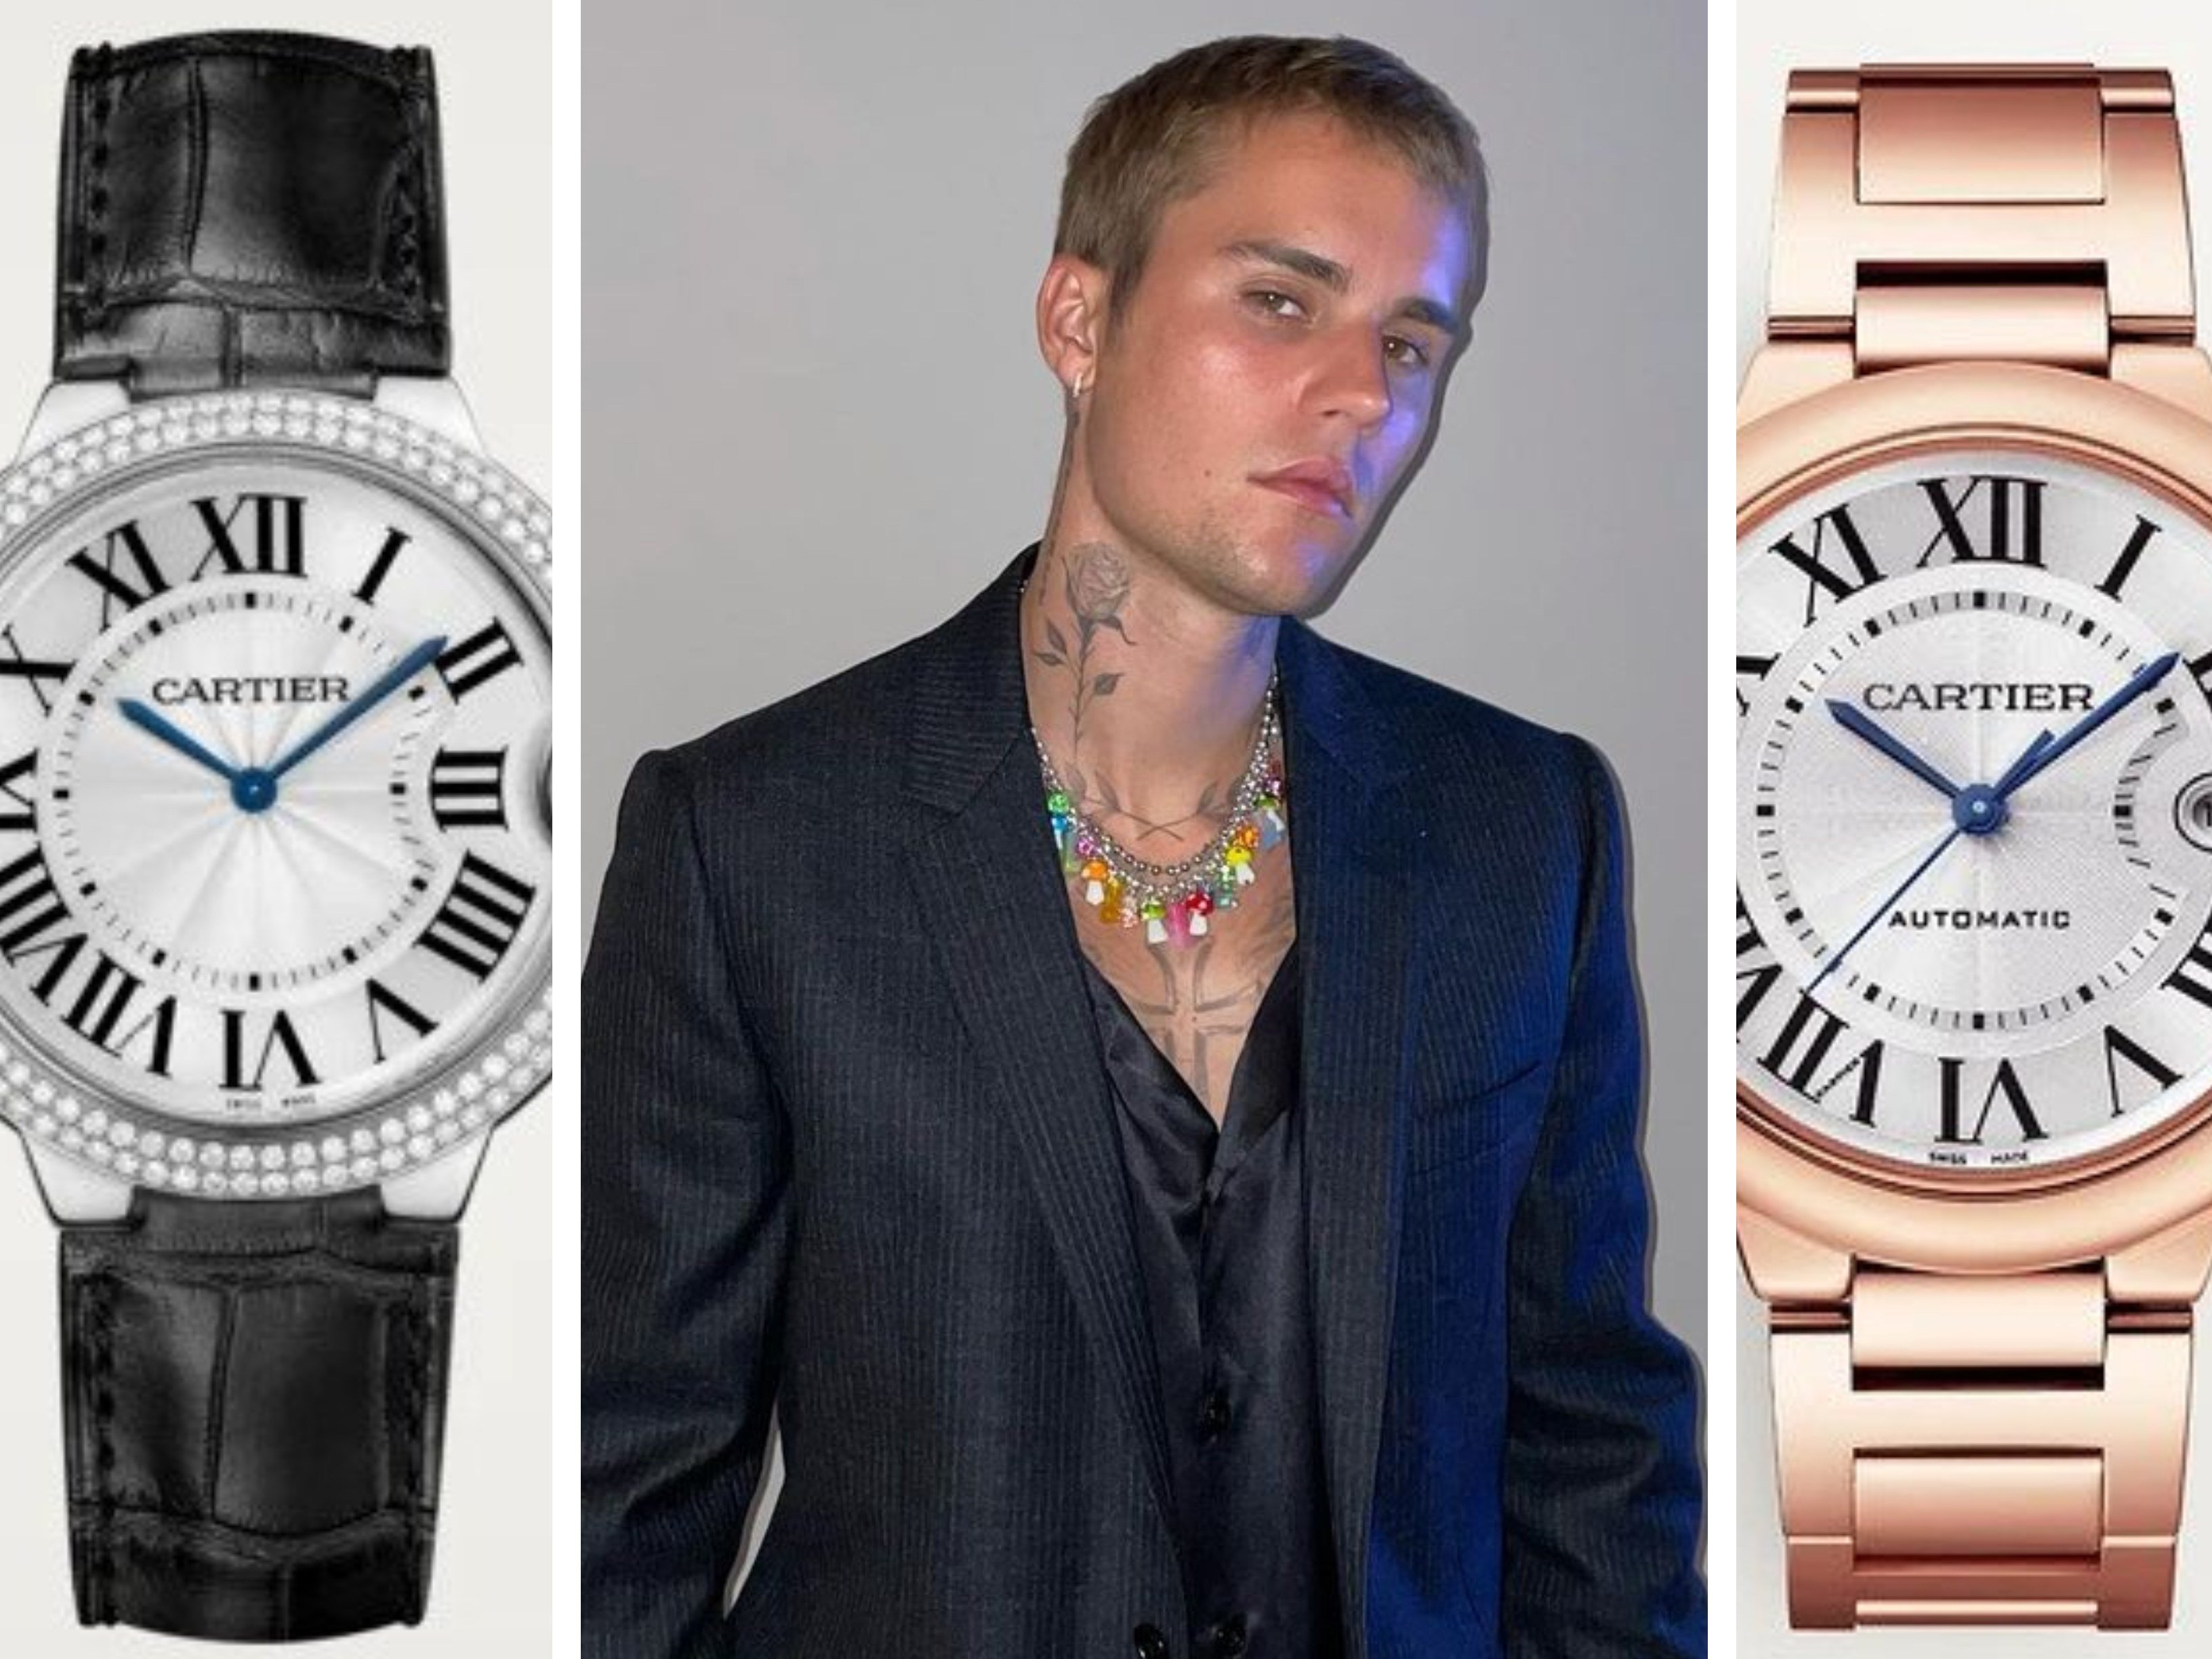 Justin Bieber boasts a collection of luxurious watches indeed. Photos: Cartier, @justinbieber/Instagram